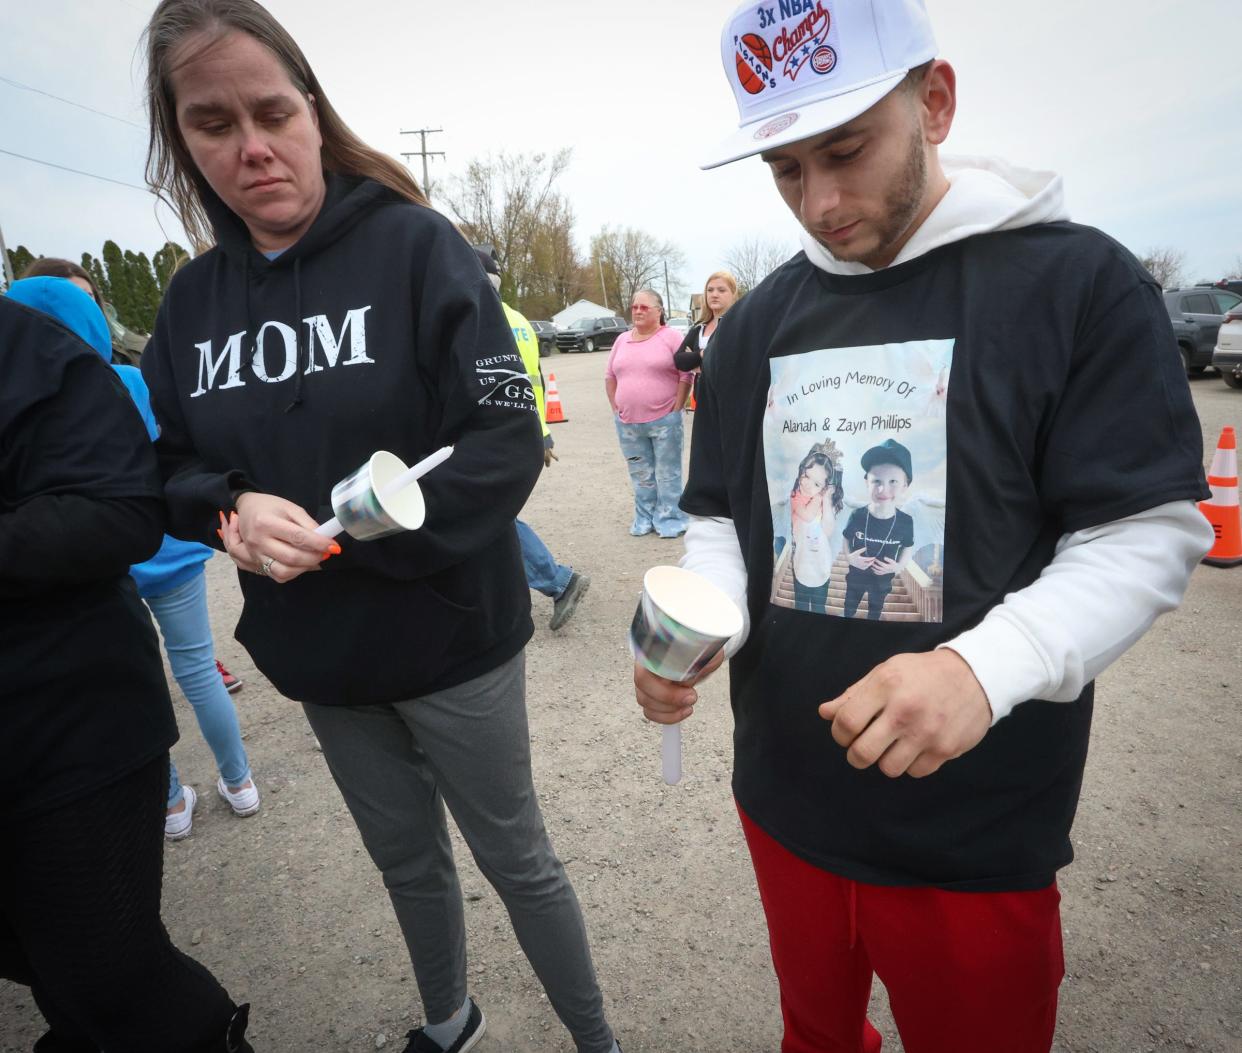 Missy Kowalczyk (left) and Brent Green attempt to light candles at a vigil held for Alanah and Zayn Phillips at the Swan Boat Club on Friday in Newport. The high winds off Lake Erie kept the candles from igniting.